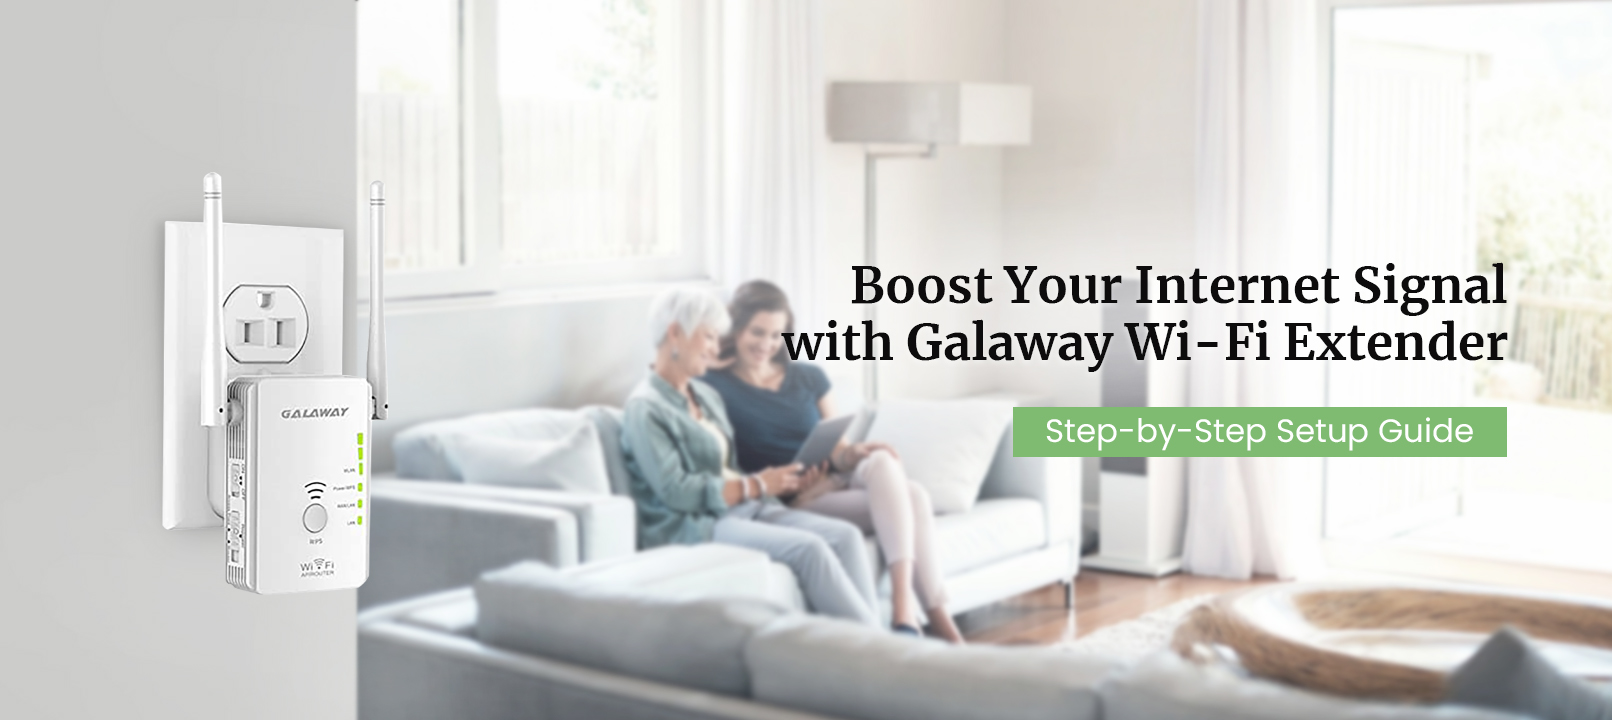 The Ultimate Guide for Galaway Wi-Fi Extender Setup